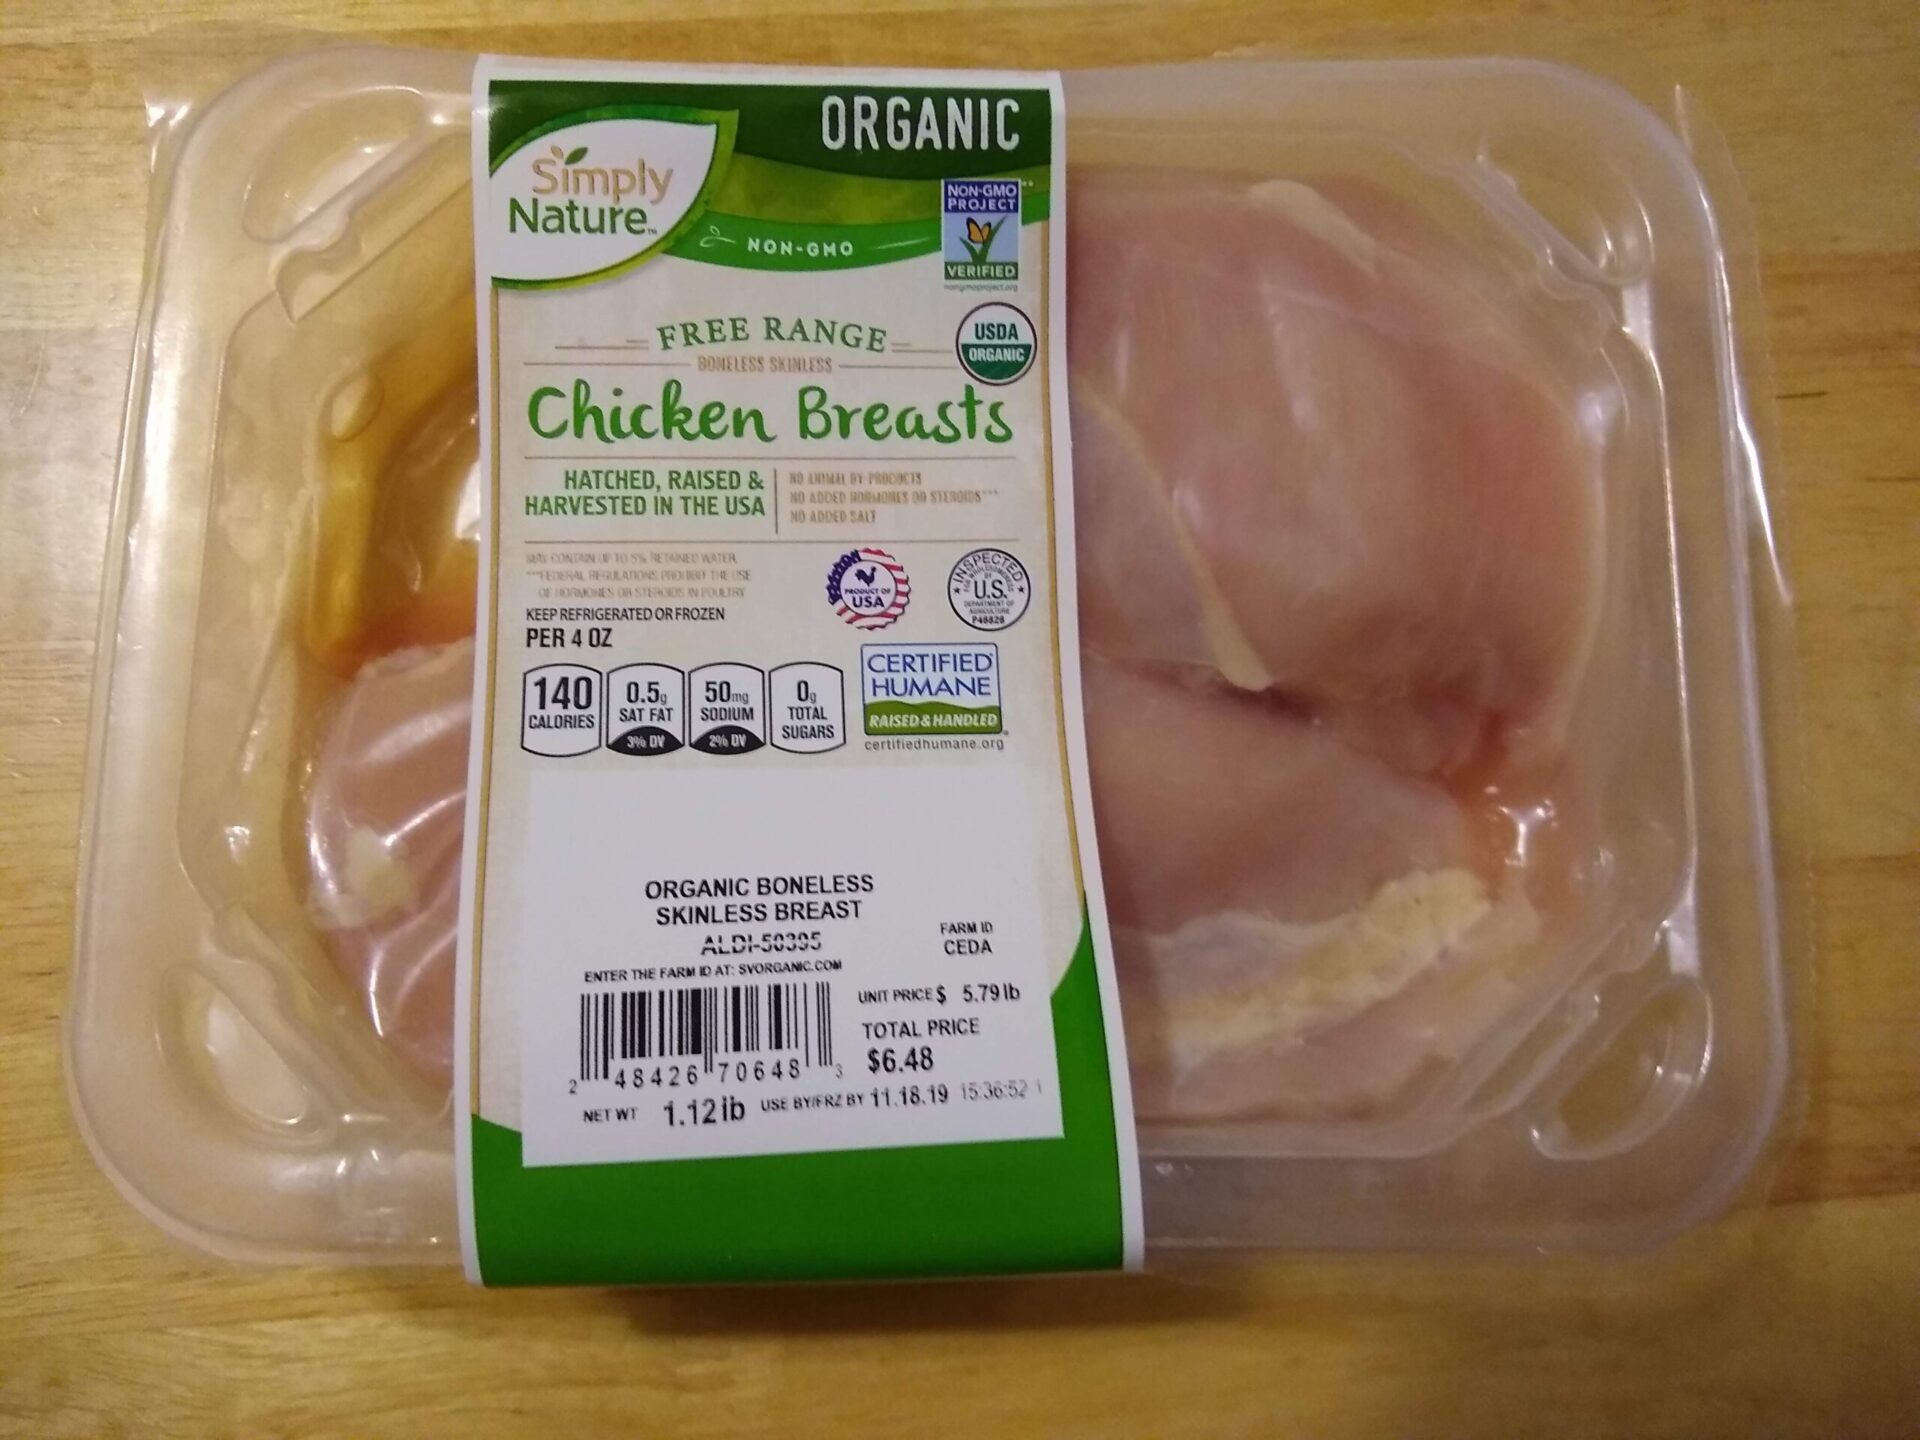 https://www.aldireviewer.com/wp-content/uploads/2019/12/Simply-Nature-Organic-Free-Range-Chicken-Breasts-scaled.jpg